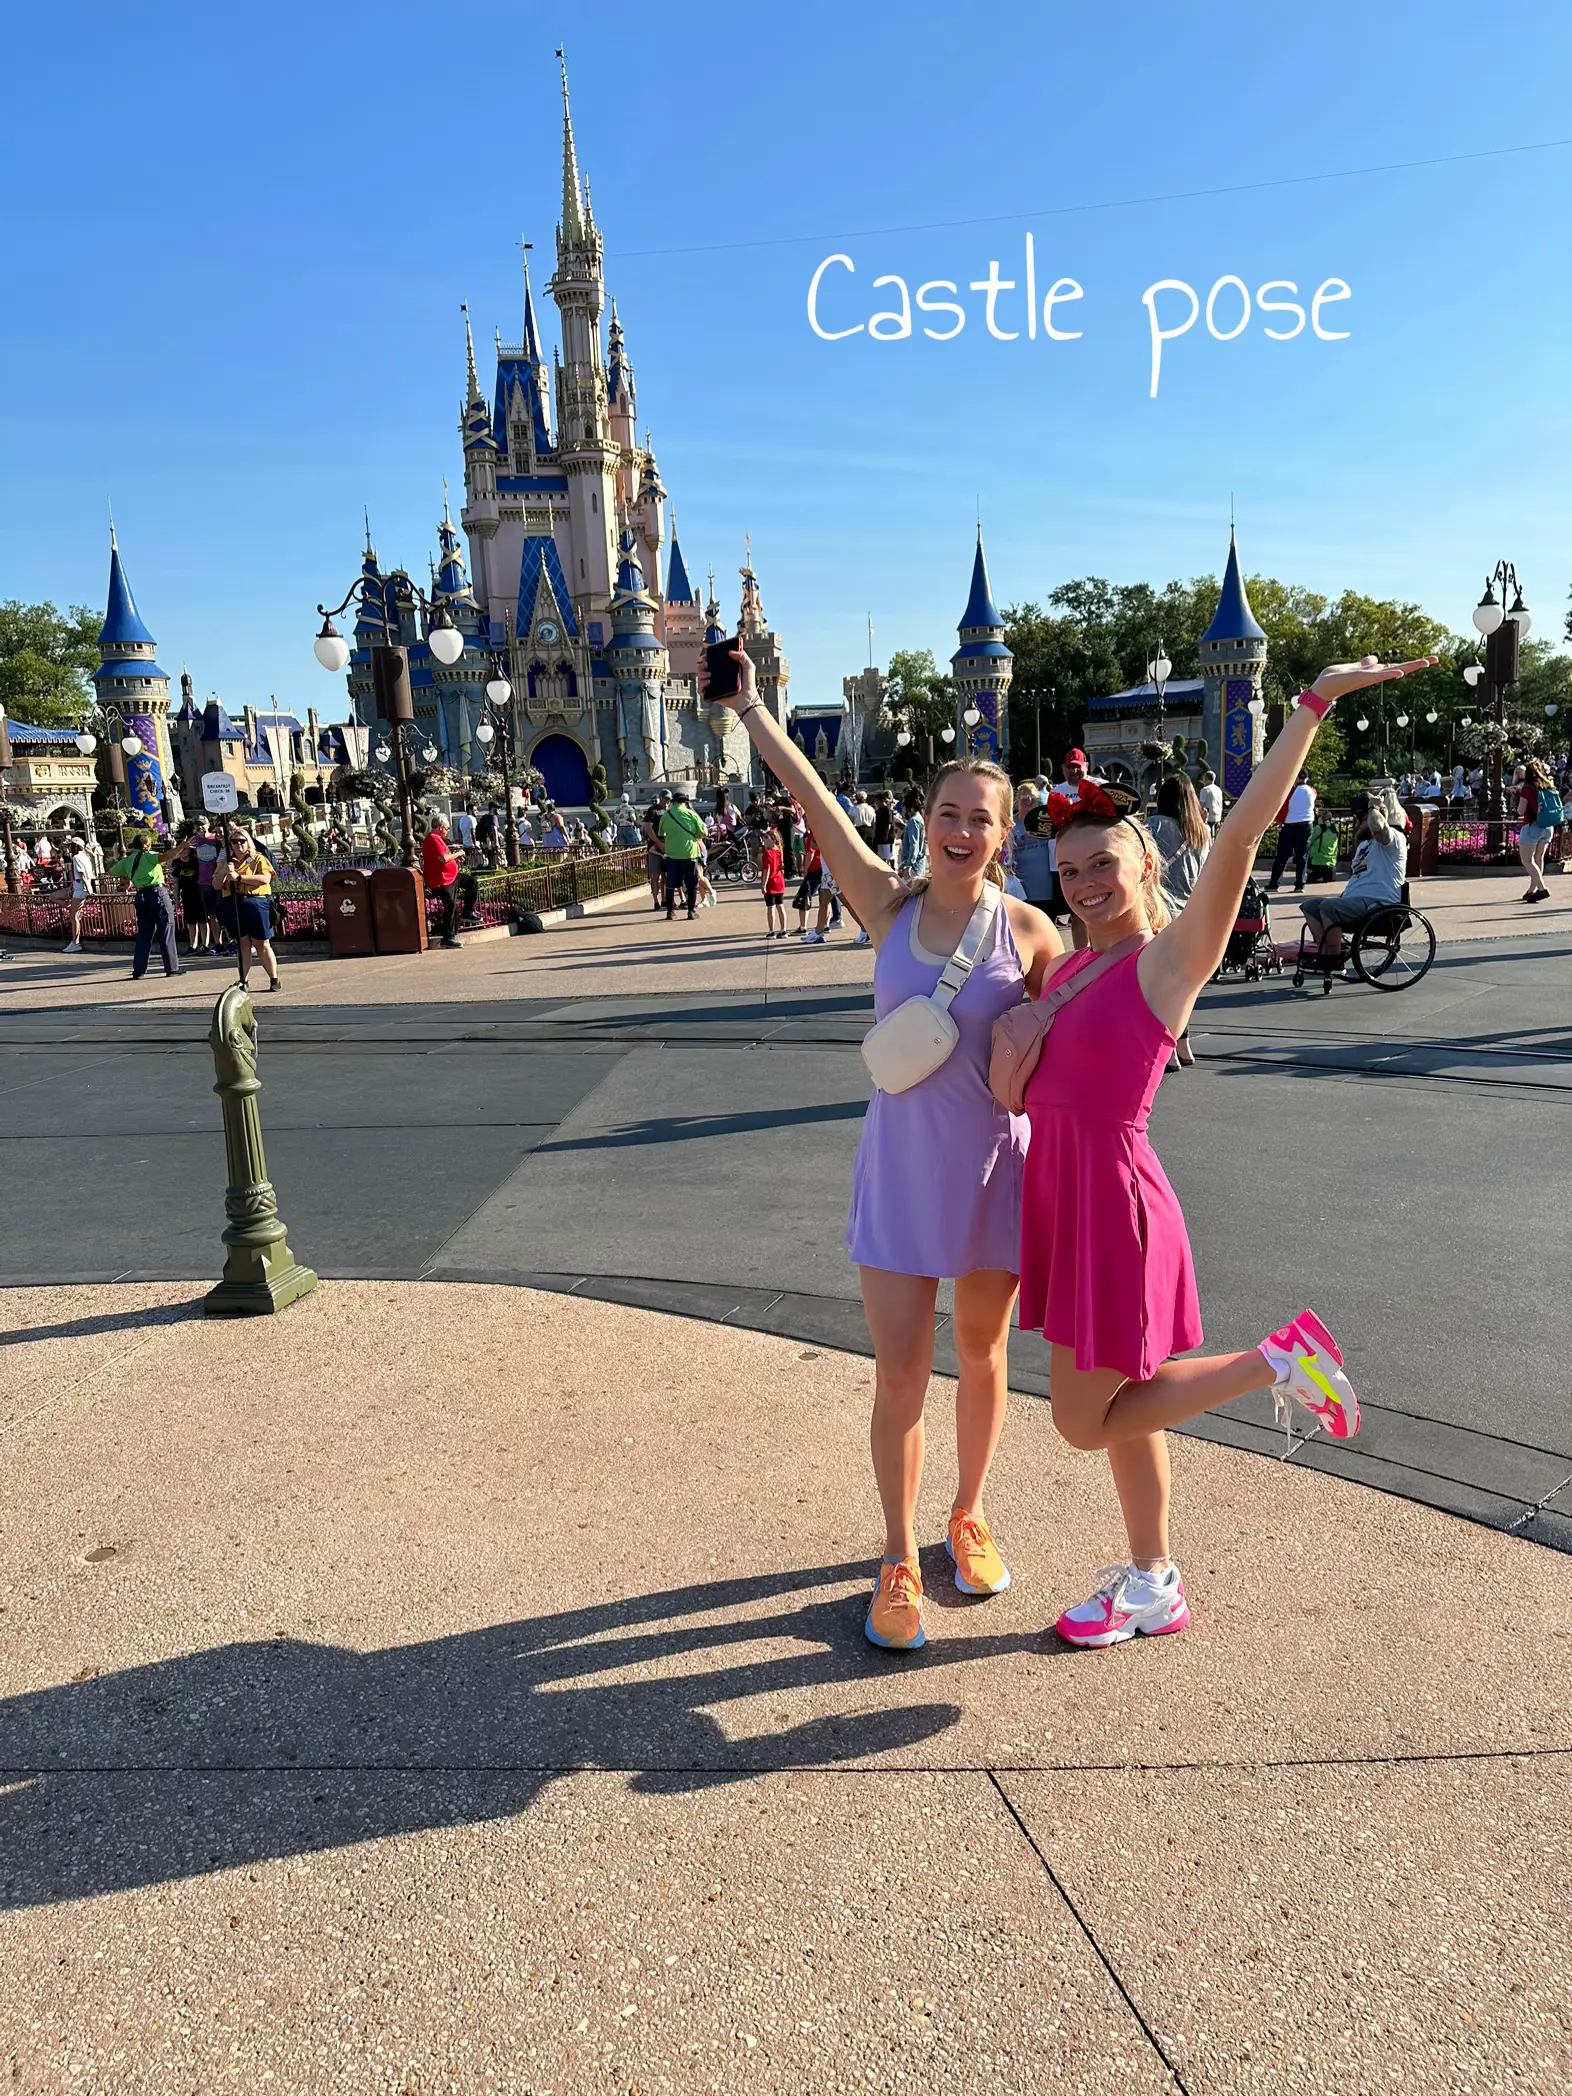  Two women are posing in front of a castle.